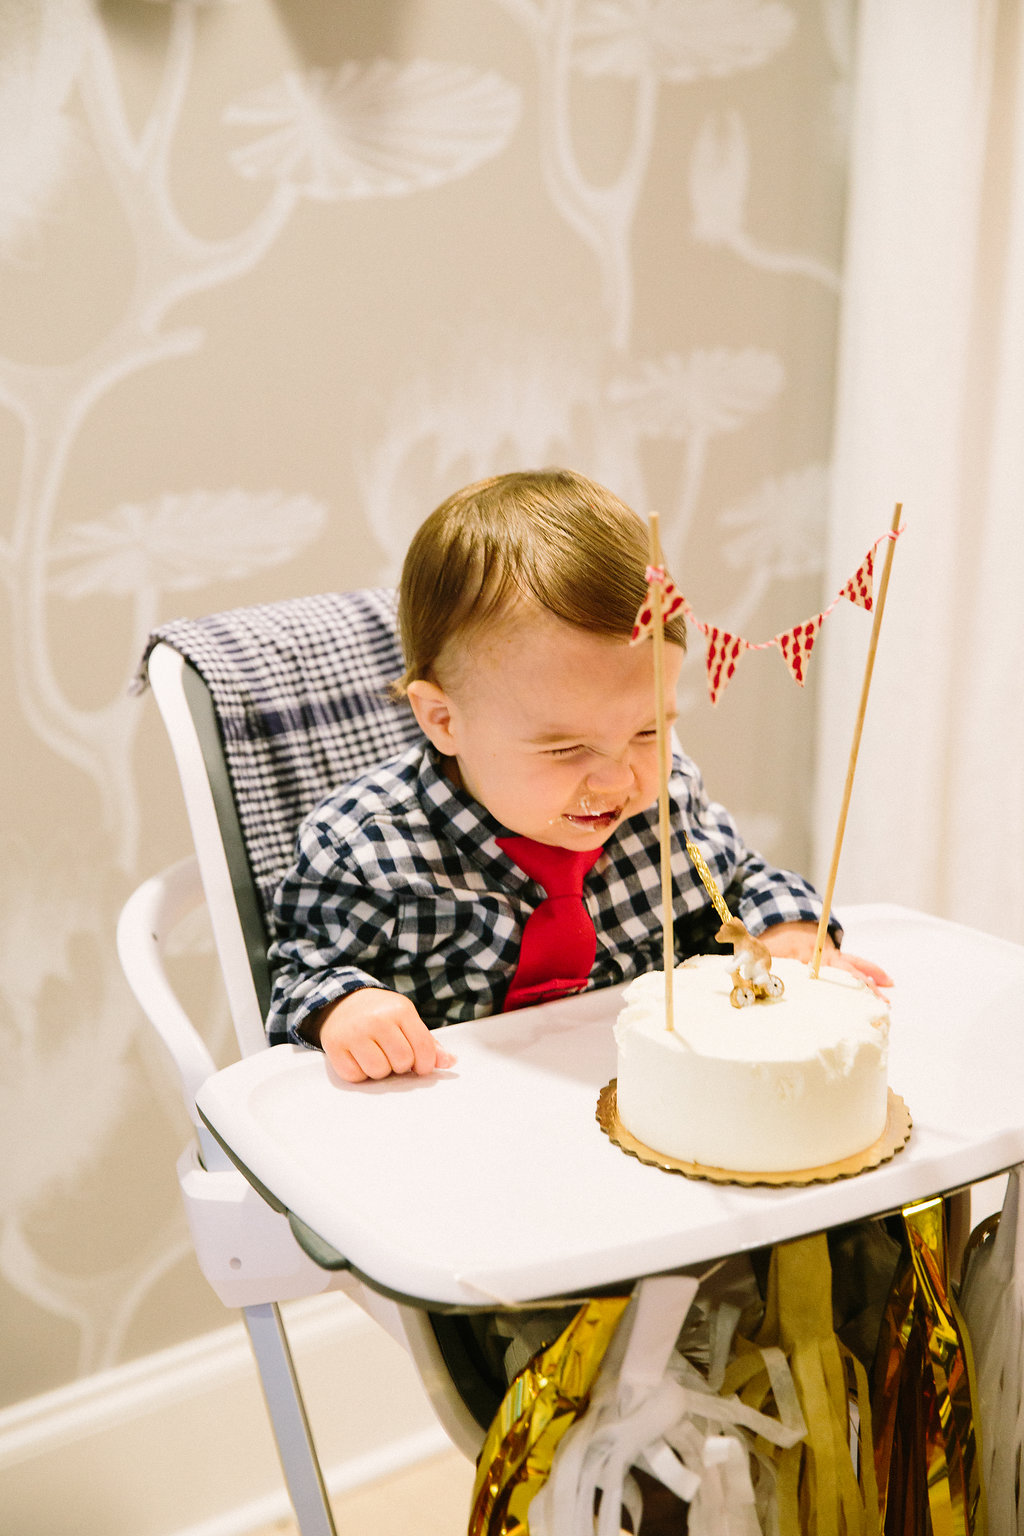 Major laughs as he sits in front of his first birthday cake